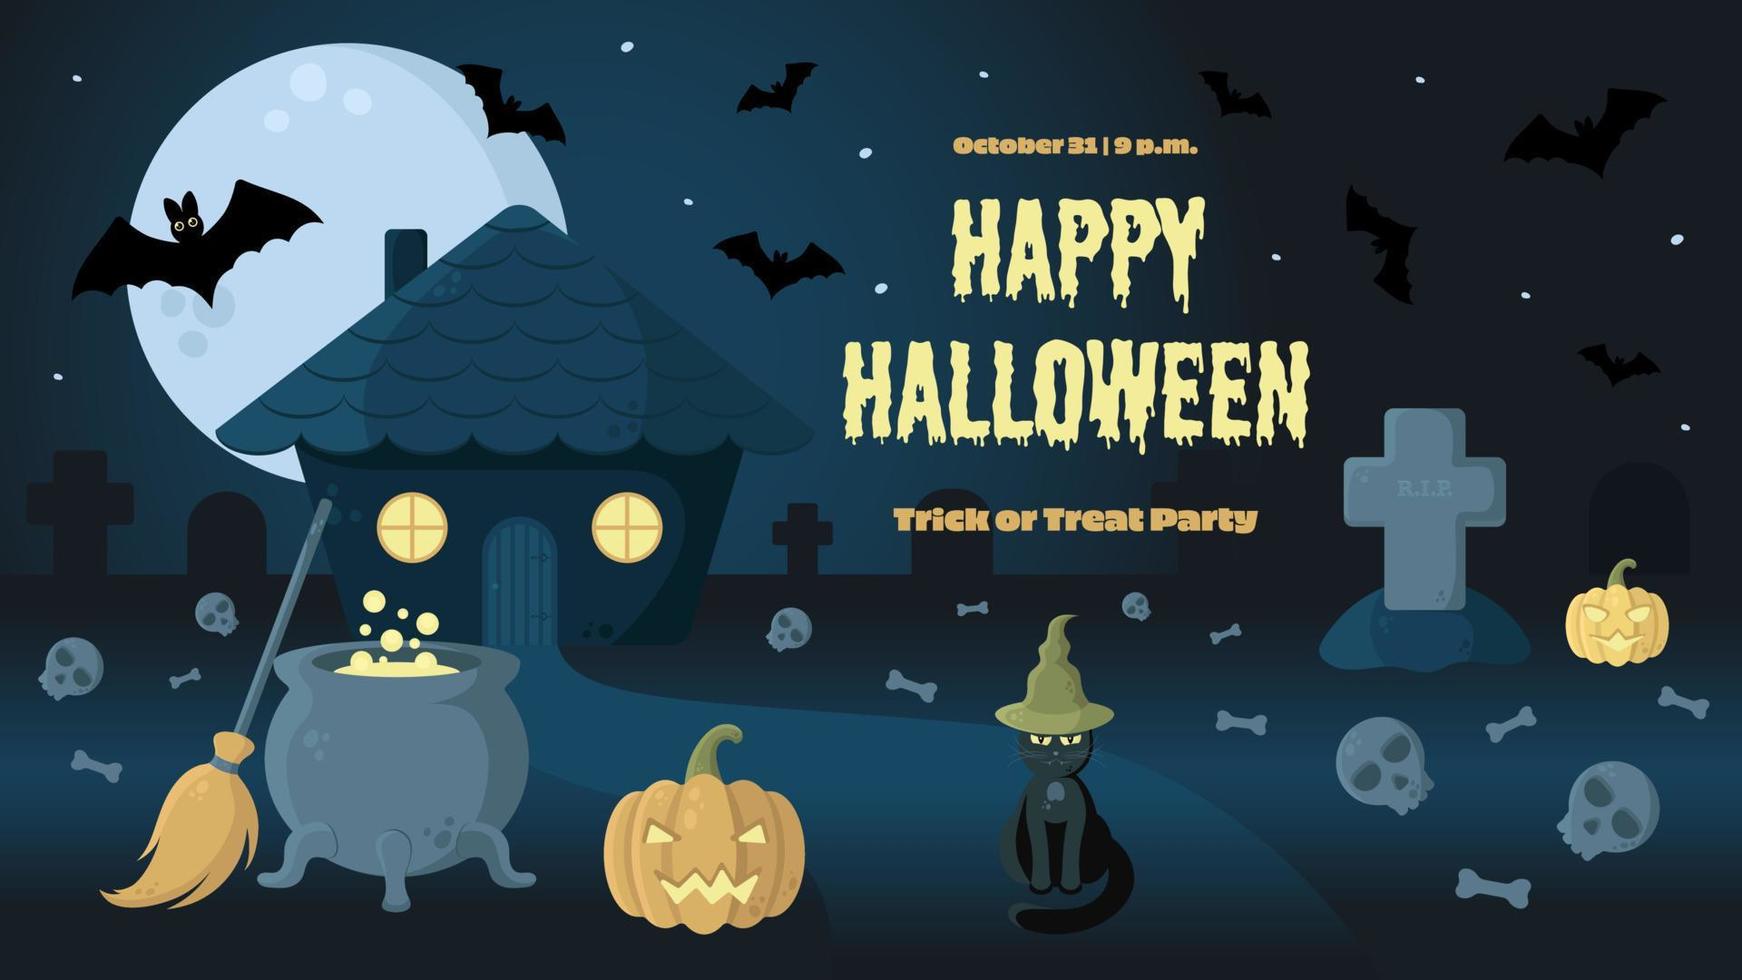 Halloween Night Vector Banner With Witch Hut, Cemetery, Jack Lantern, Cauldron, Broom, Black Cat and Bats. Perfect for Web Sites, Social Media, Printed Materials, etc.